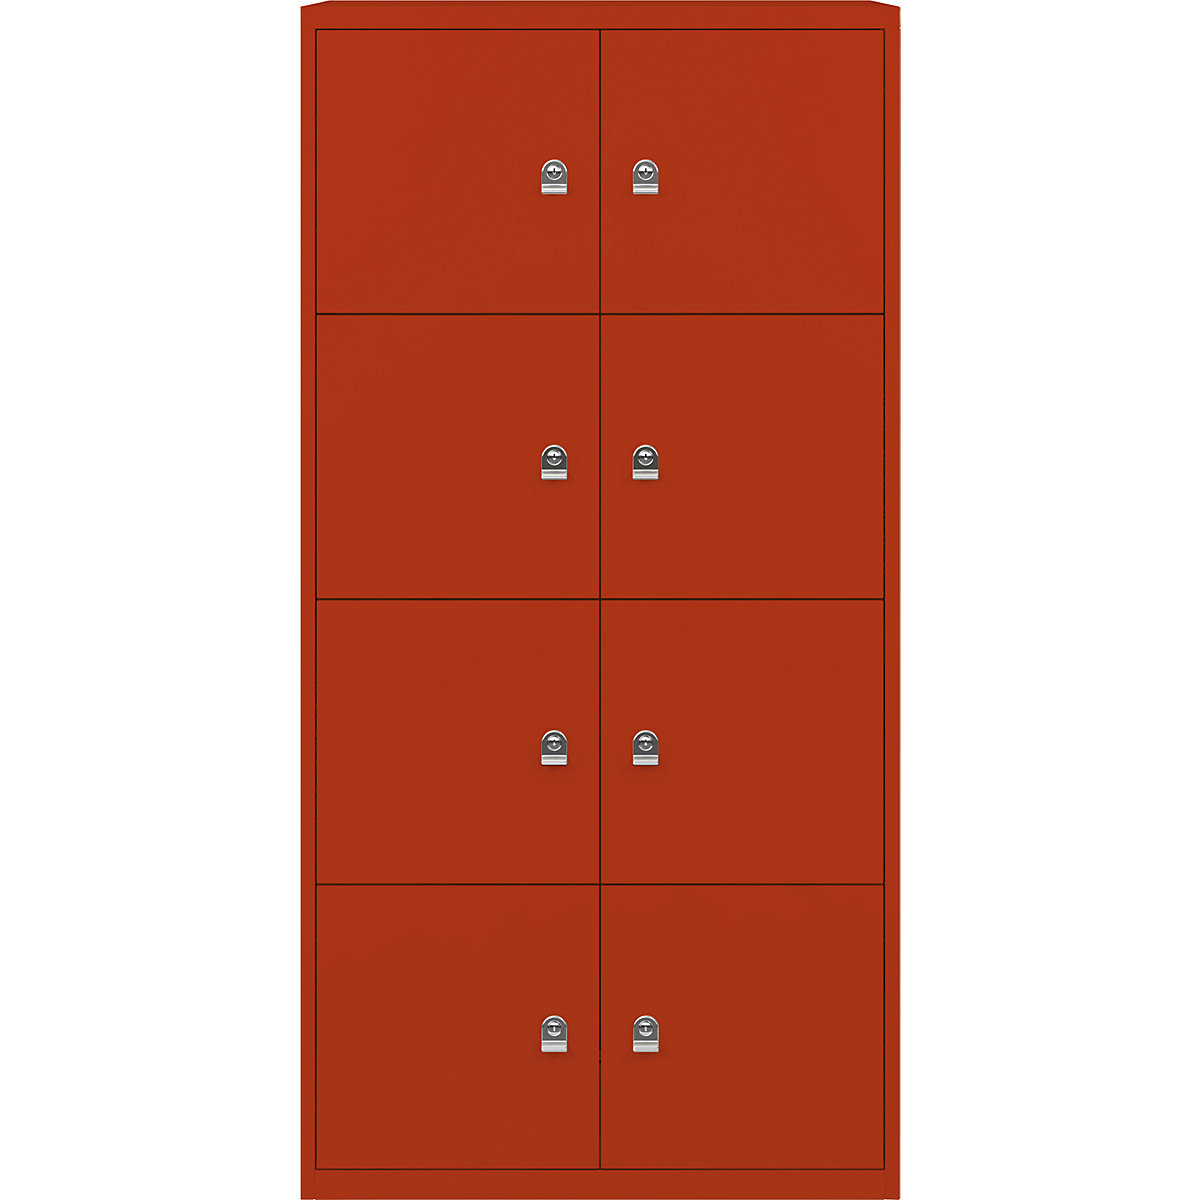 BISLEY – LateralFile™ lodge, with 8 lockable compartments, height 375 mm each, sevilla